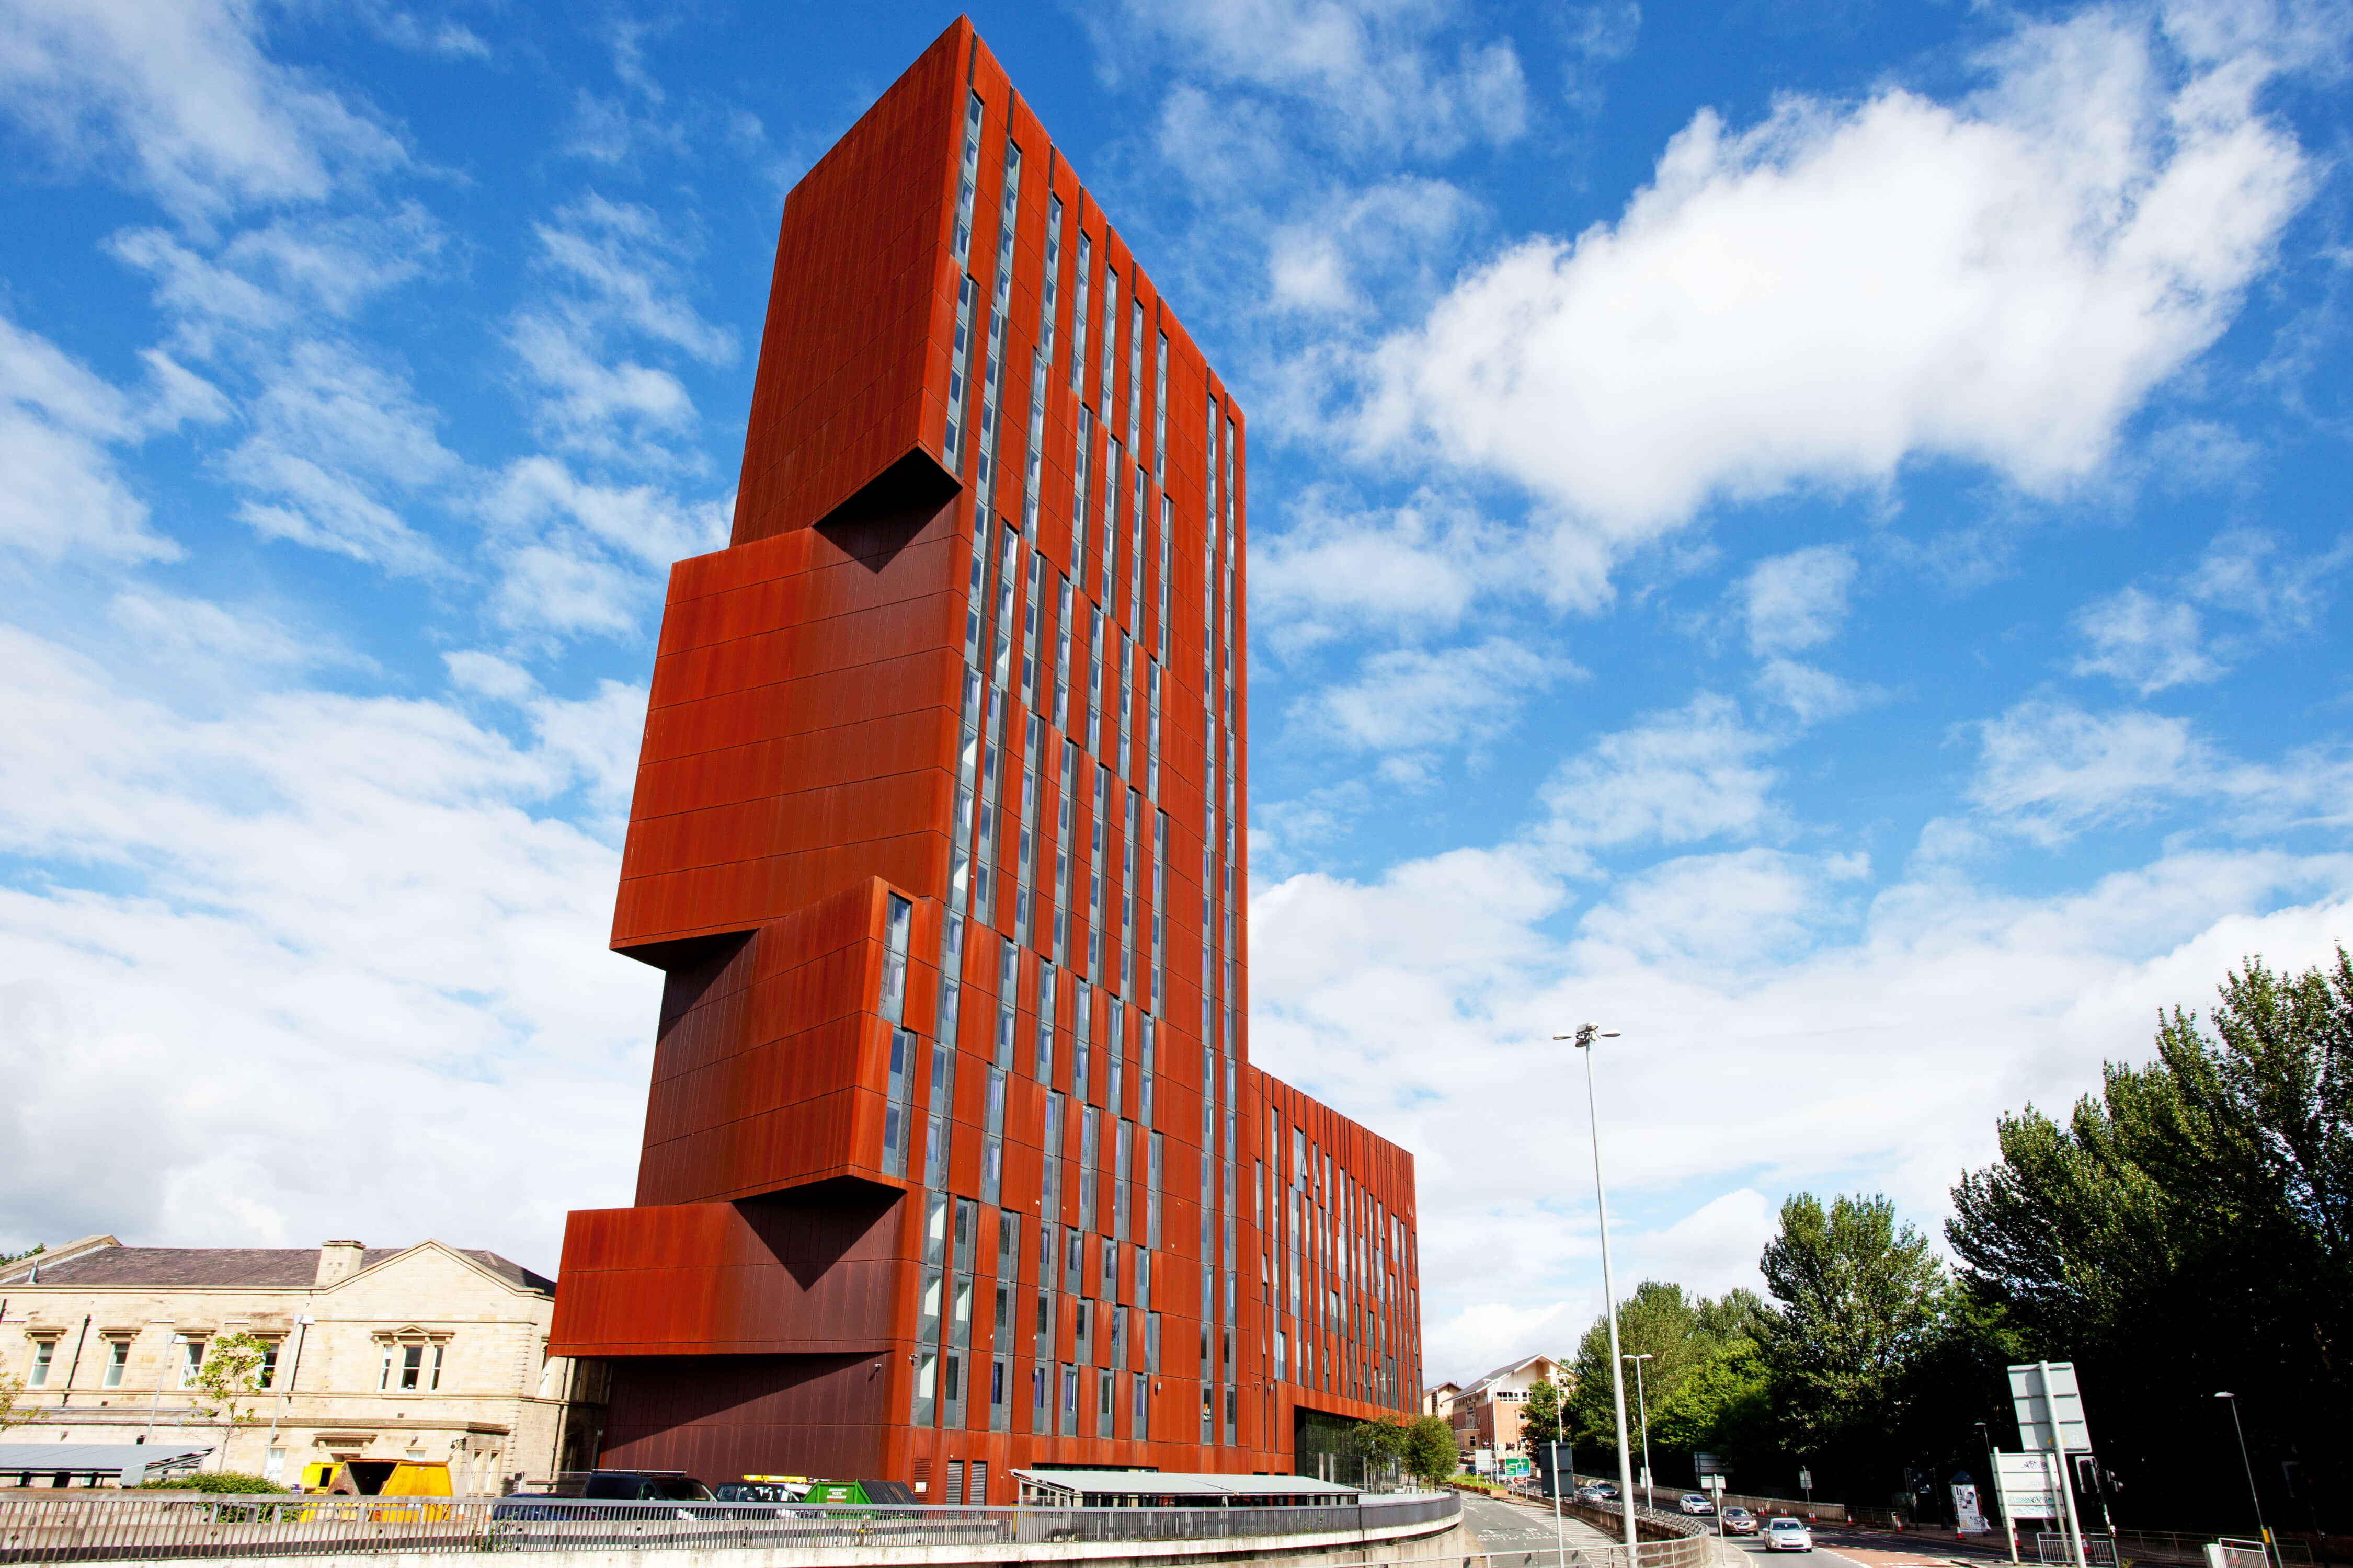 Unite Students accommodation at Broadcasting Tower in Leeds